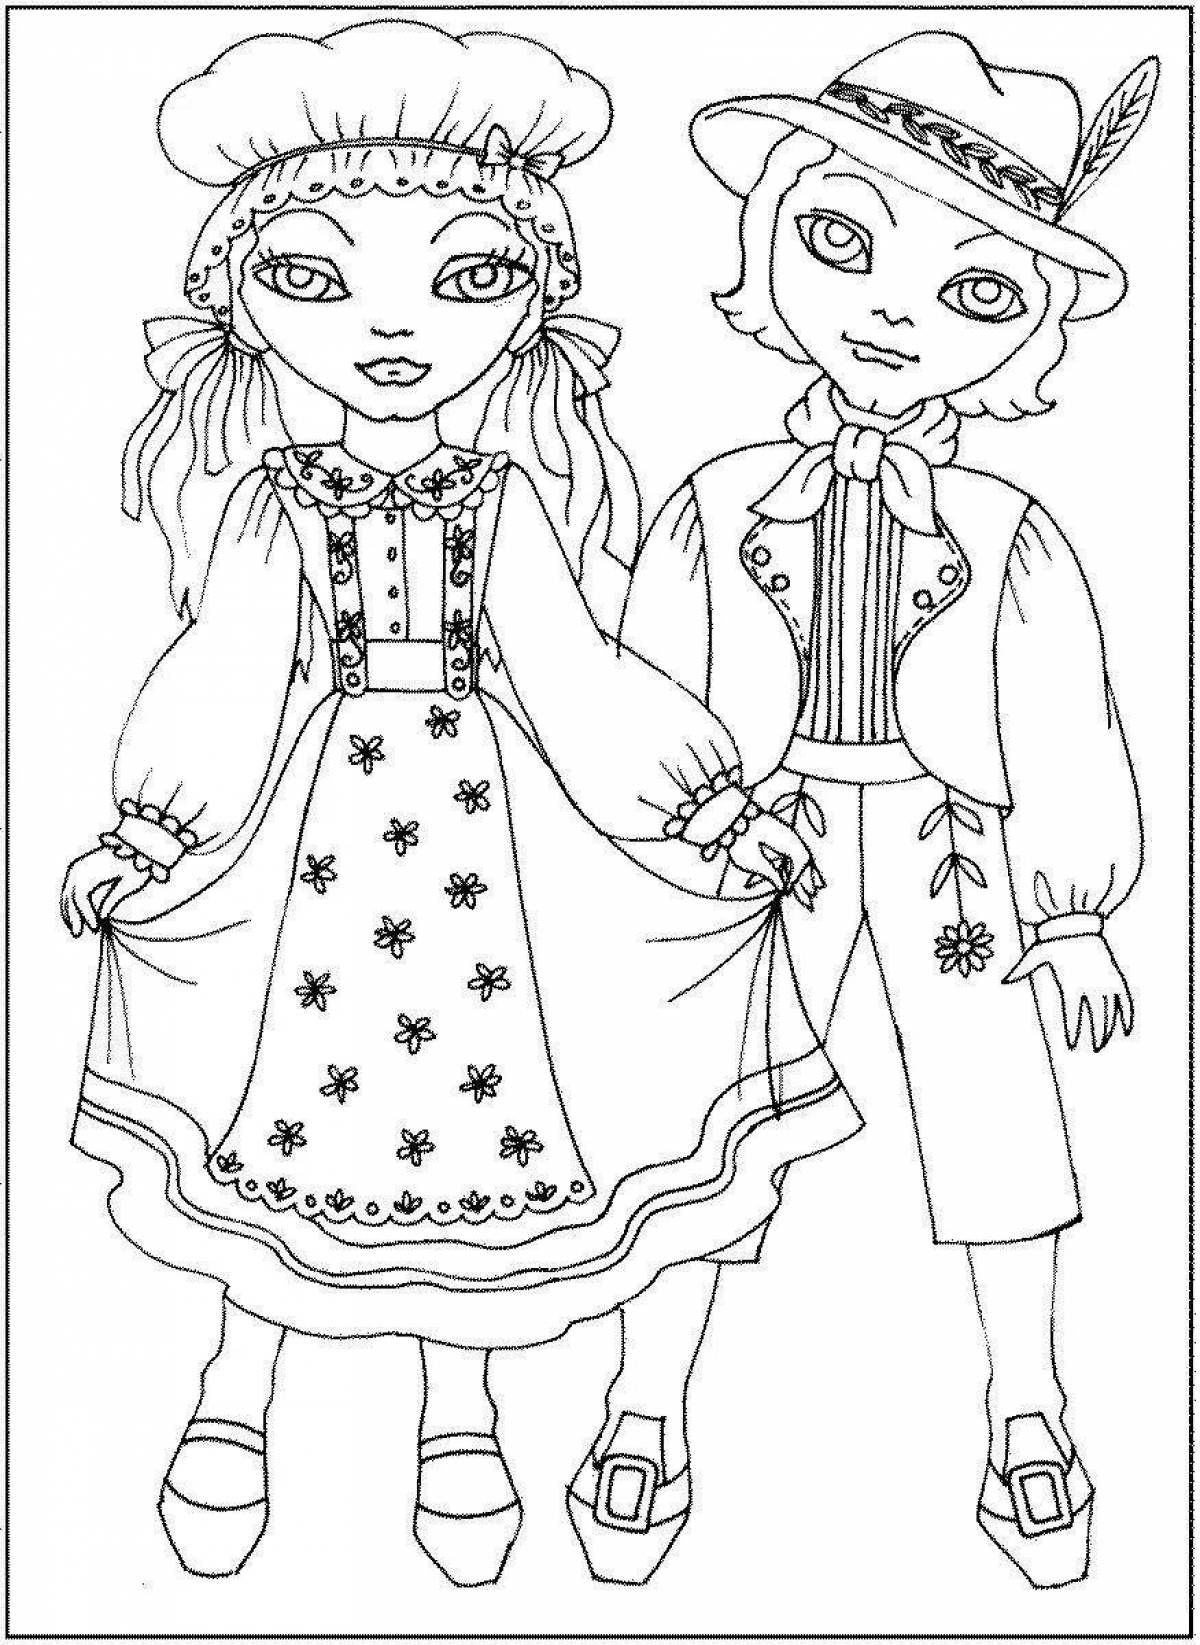 Coloring page charming belarusian doll